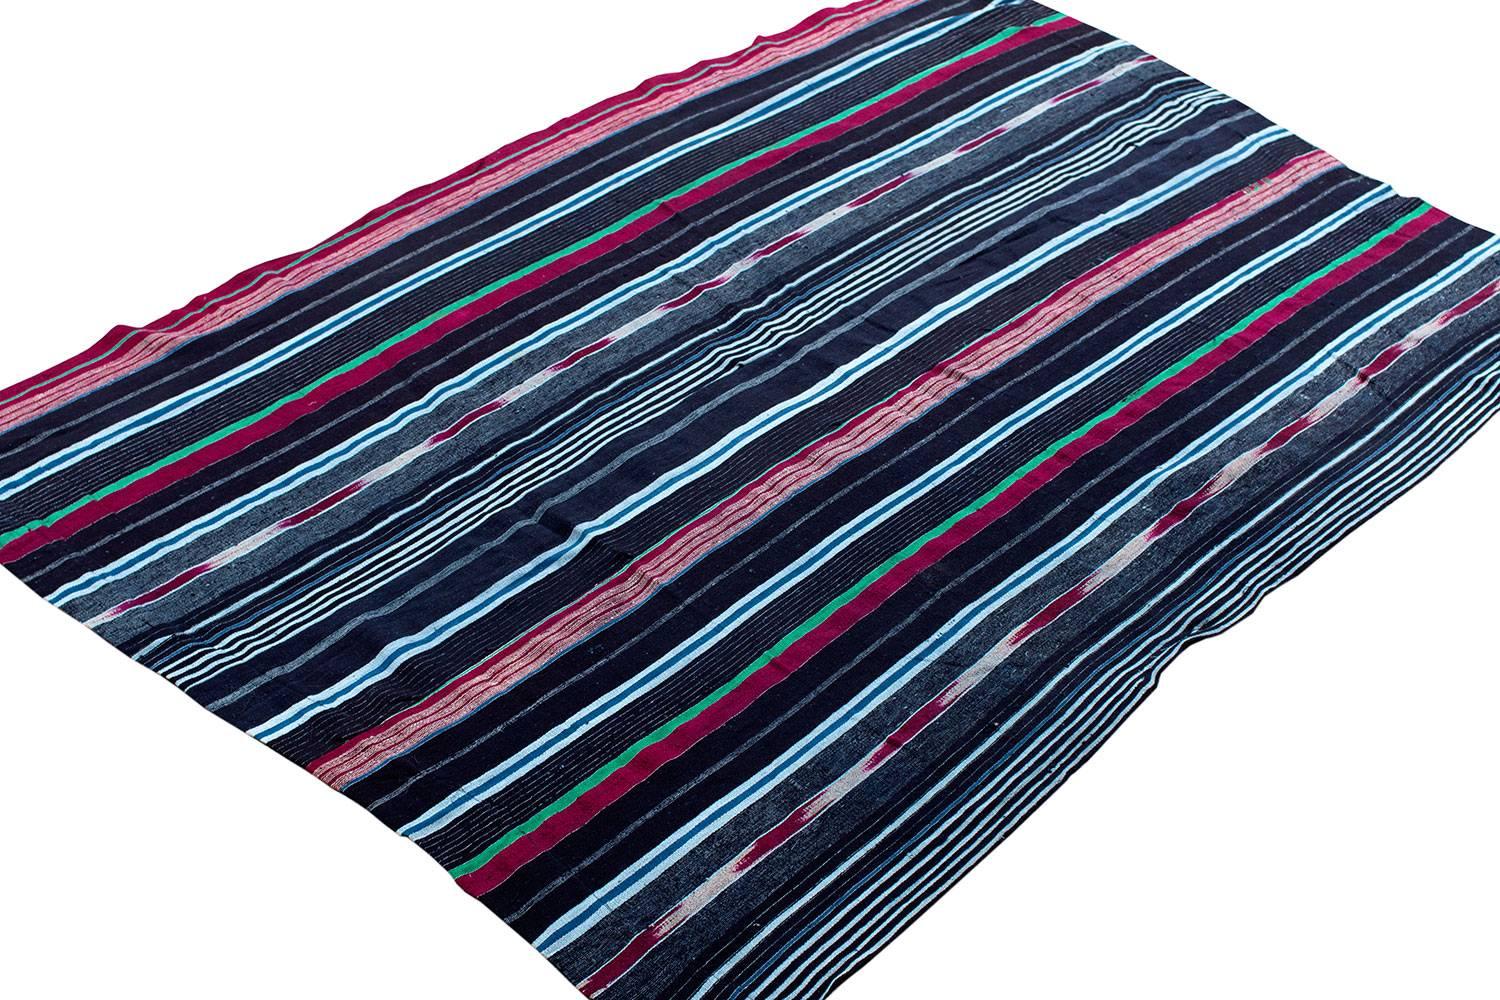 This textile is a superb Yoruba men's wrap cloth. The fine ikat pattern is rare for aso oke textiles from the Yoruba people from around mid-20th century. This textile is woven with lush magenta, green, and indigo colors. This textile was woven by